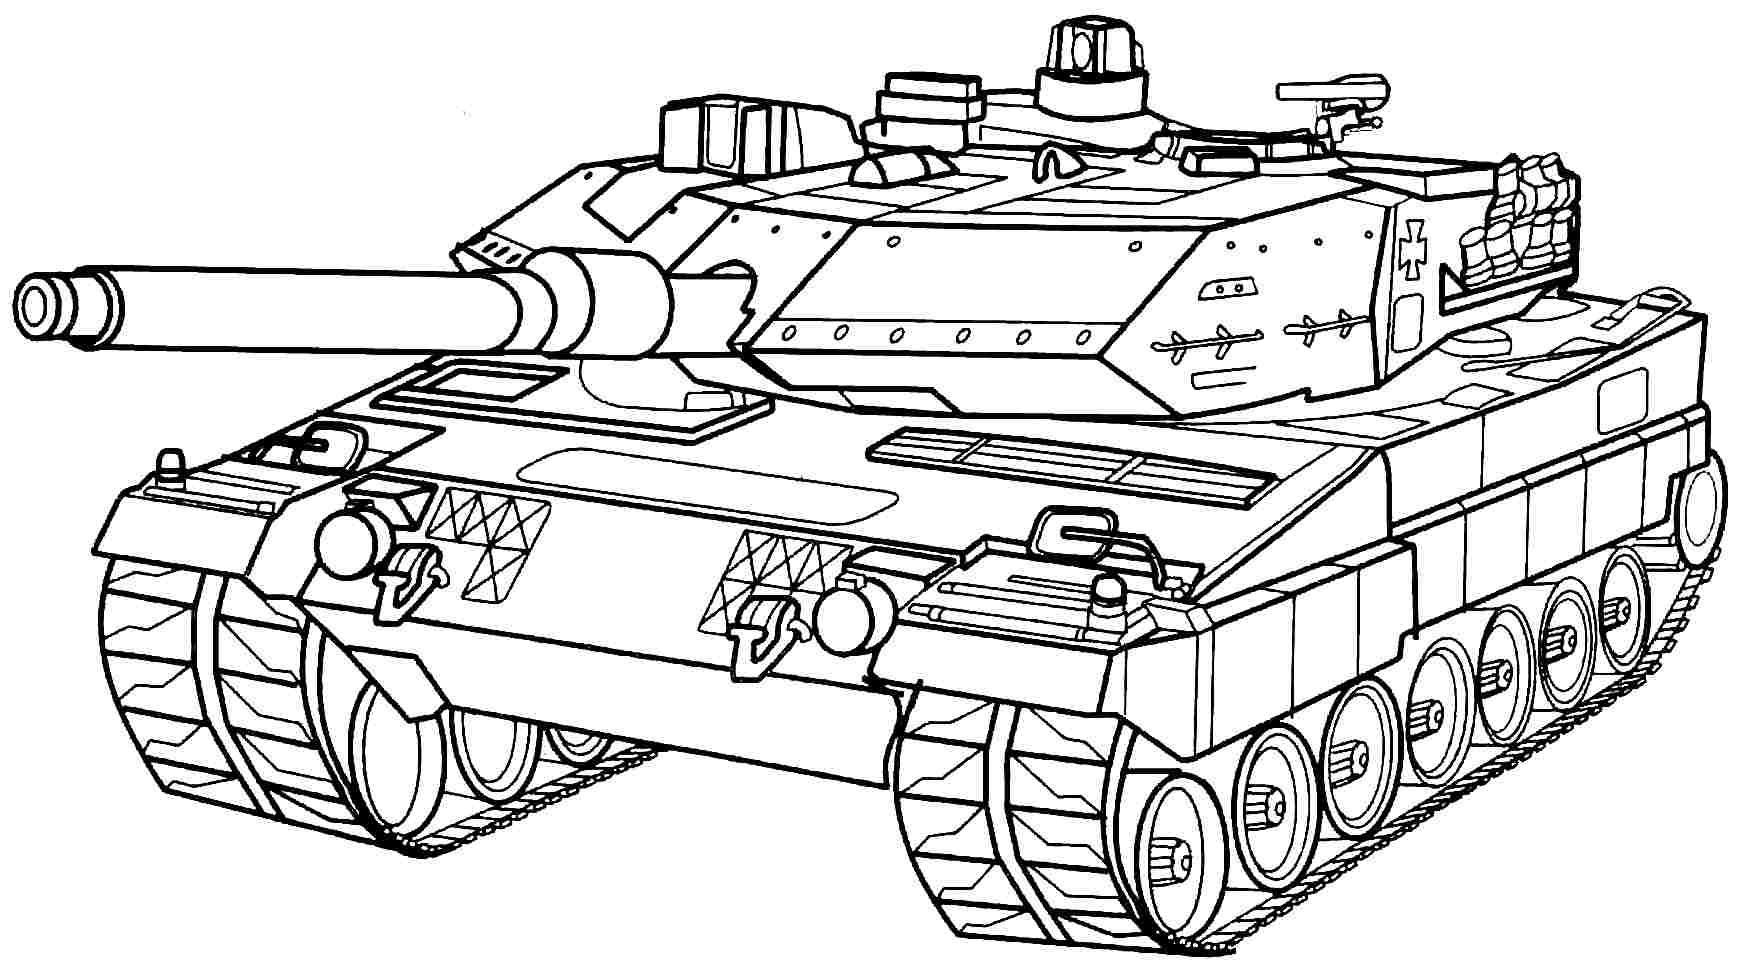 Coloring page Tank #138032 (Transportation) – Printable Coloring Pages